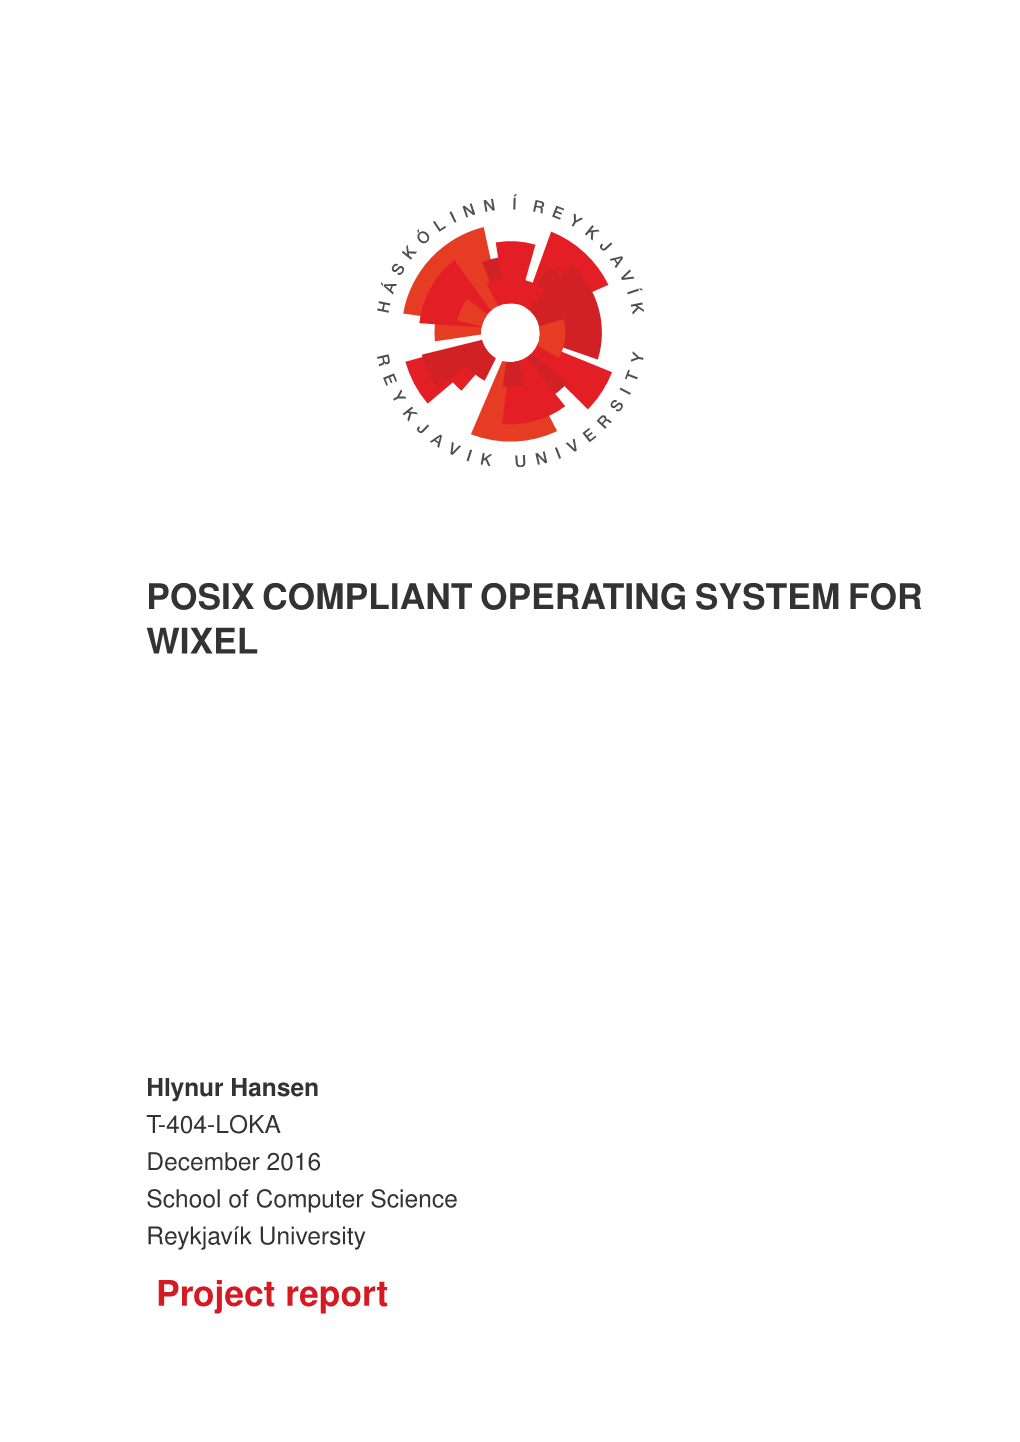 POSIX COMPLIANT OPERATING SYSTEM for WIXEL Project Report